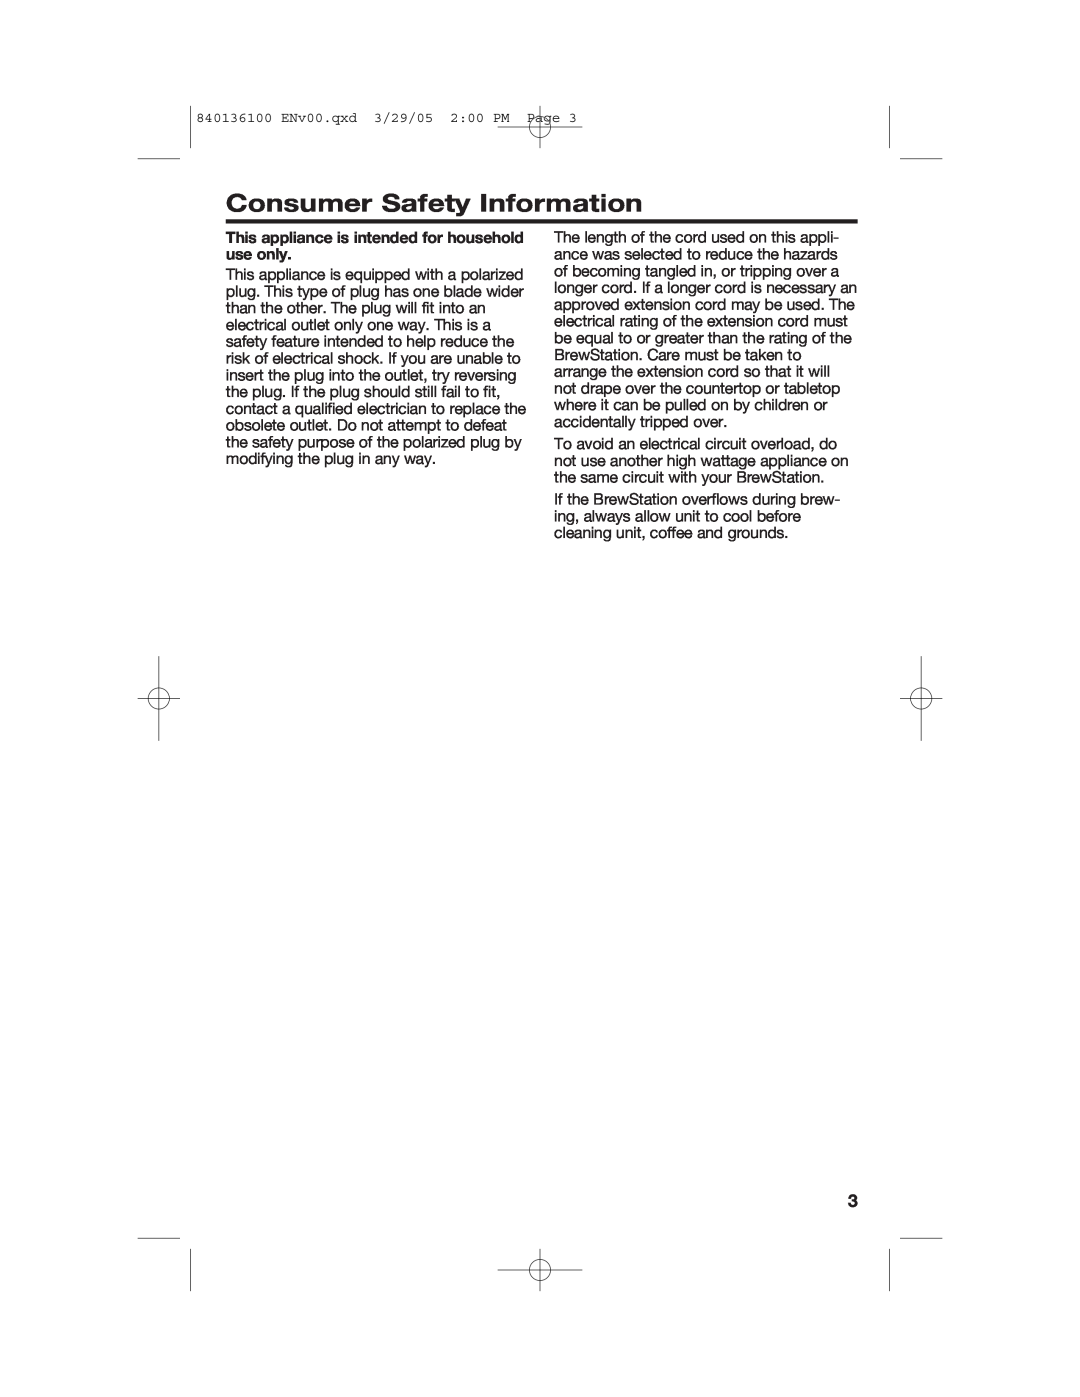 Hamilton Beach 840136100 manual Consumer Safety Information, This appliance is intended for household use only 